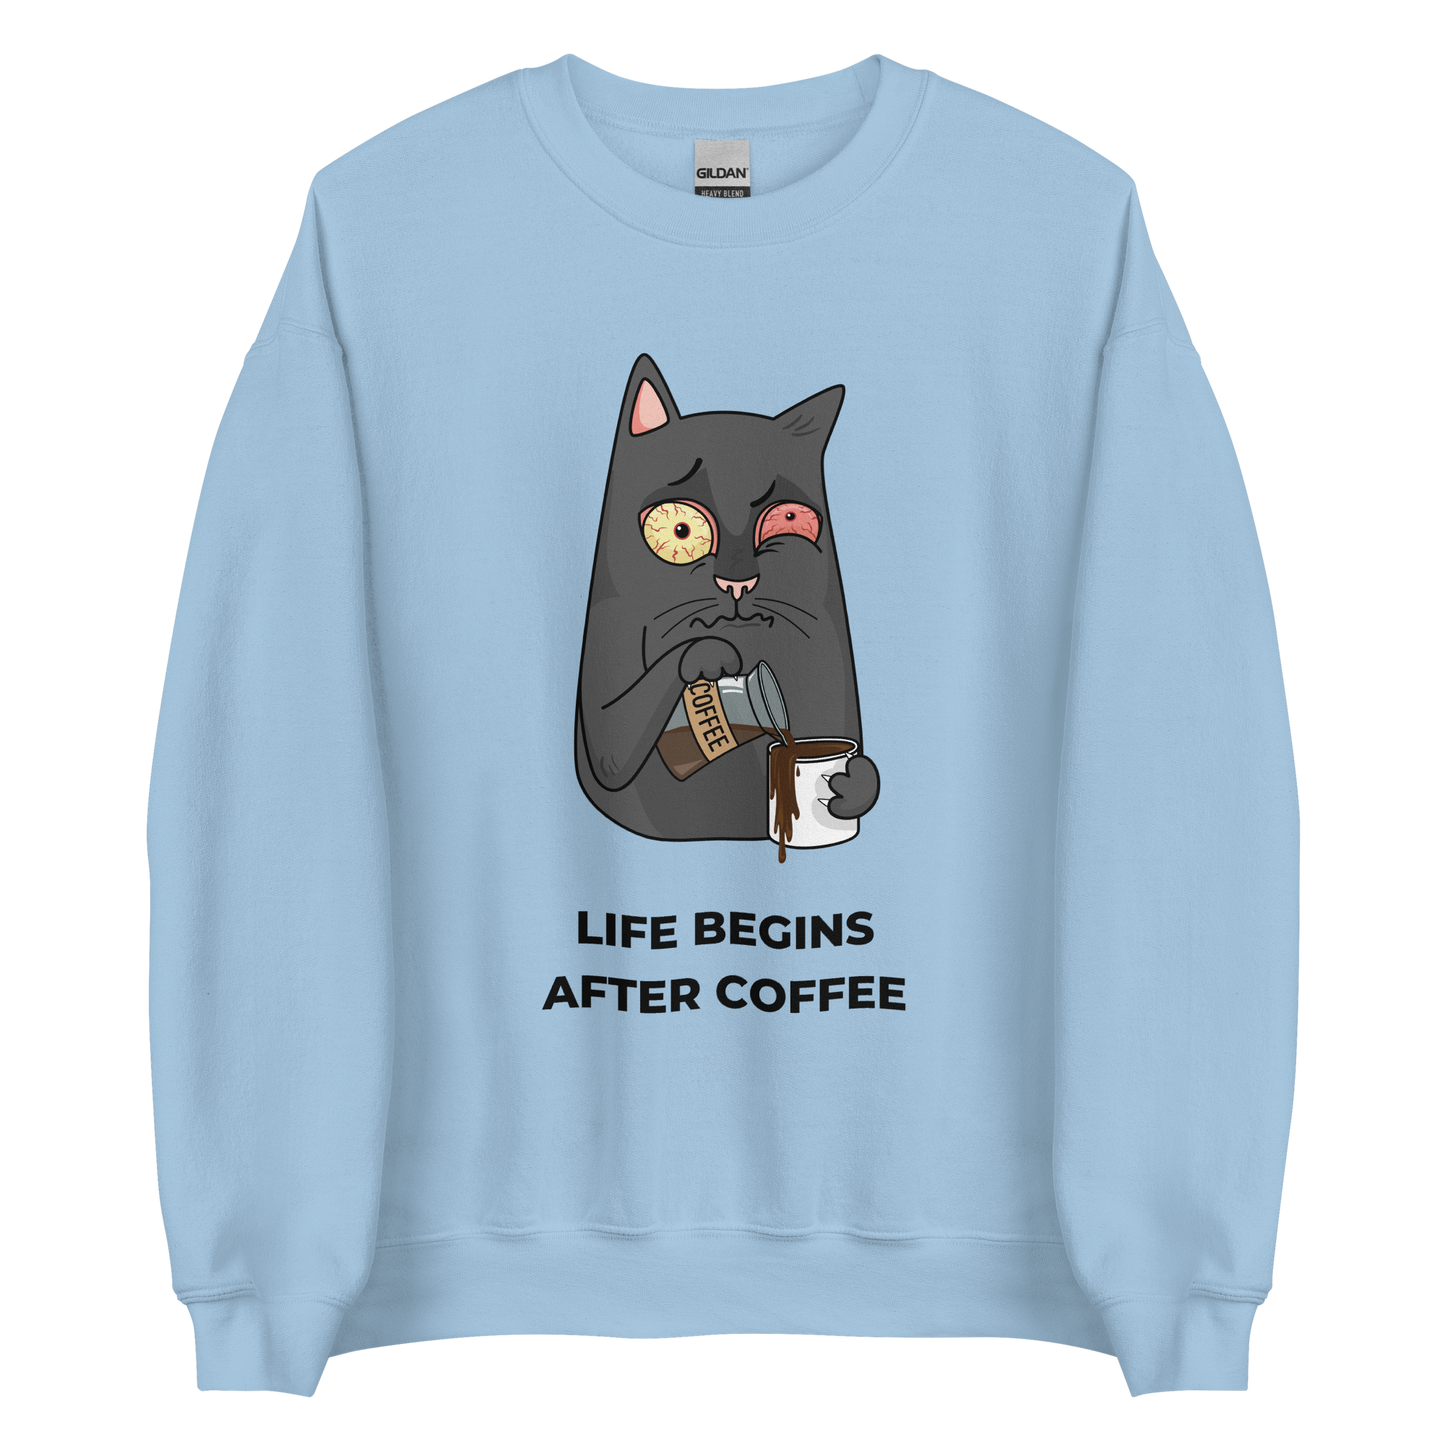 Light Blue Cat Sweatshirt featuring a hilarious Life Begins After Coffee graphic on the chest - Funny Graphic Cat Sweatshirts - Boozy Fox